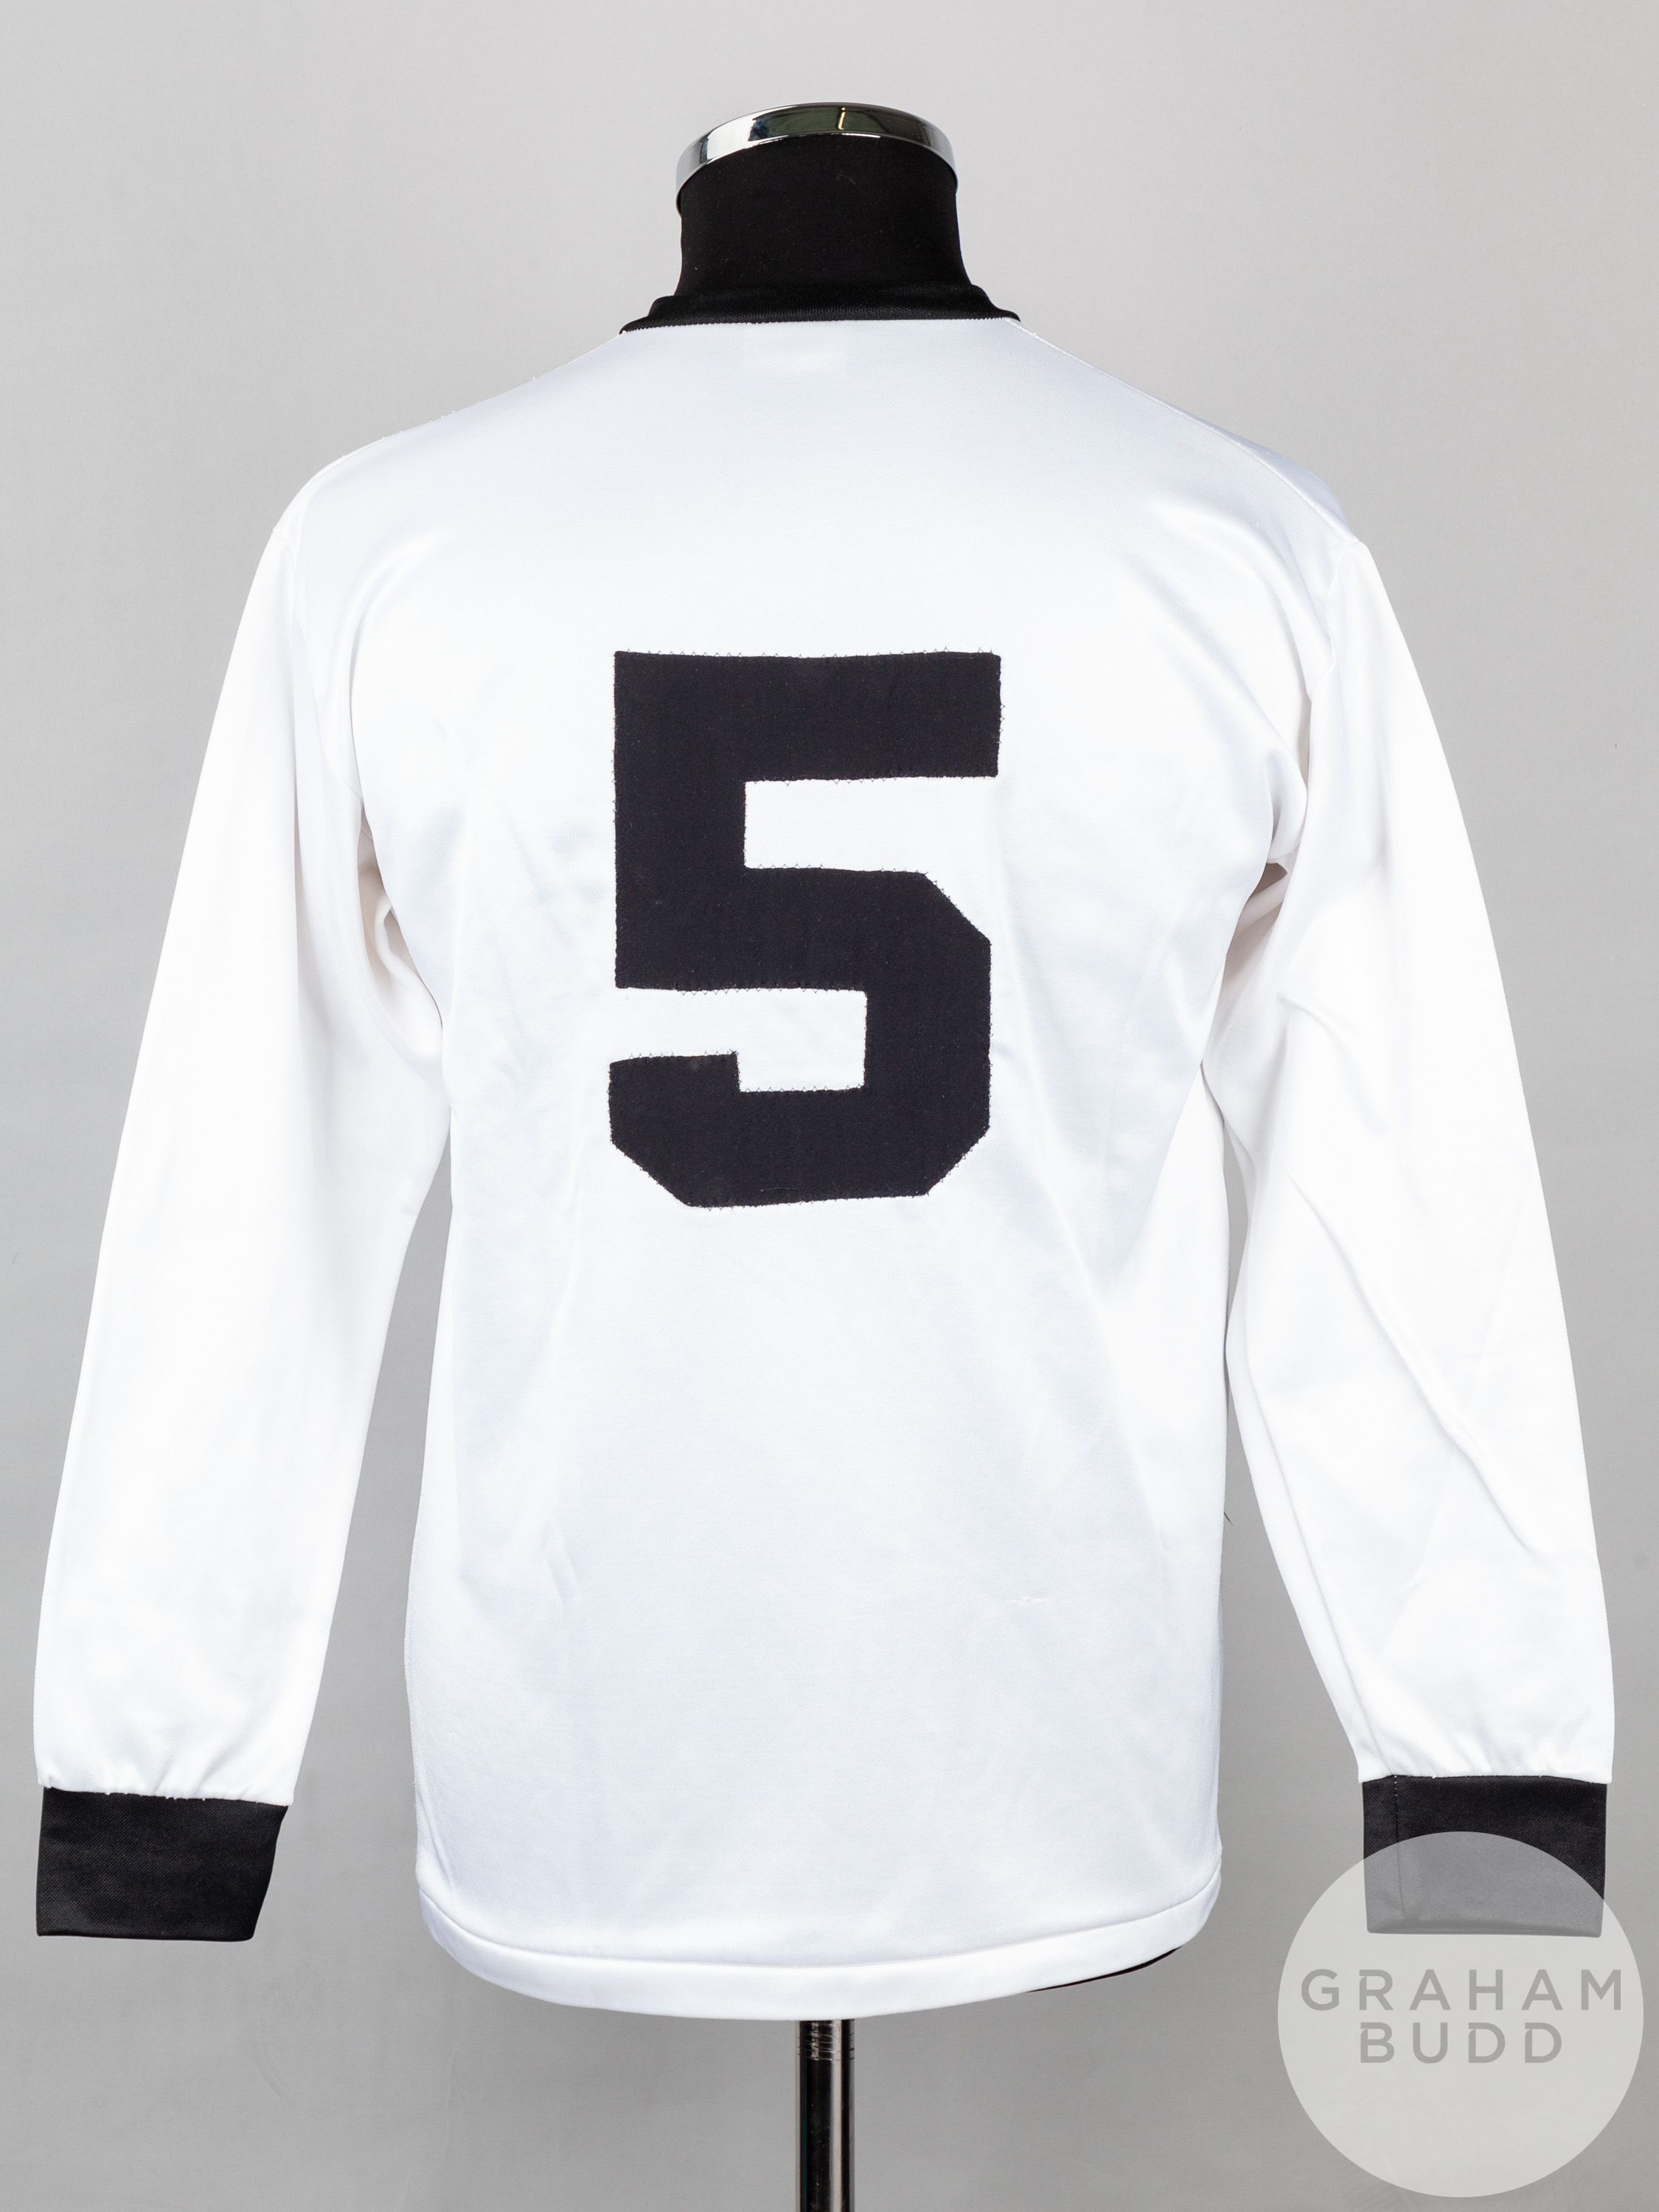 White and black No.5 Albion Rovers long-sleeved shirt, 1983-85 - Image 2 of 4